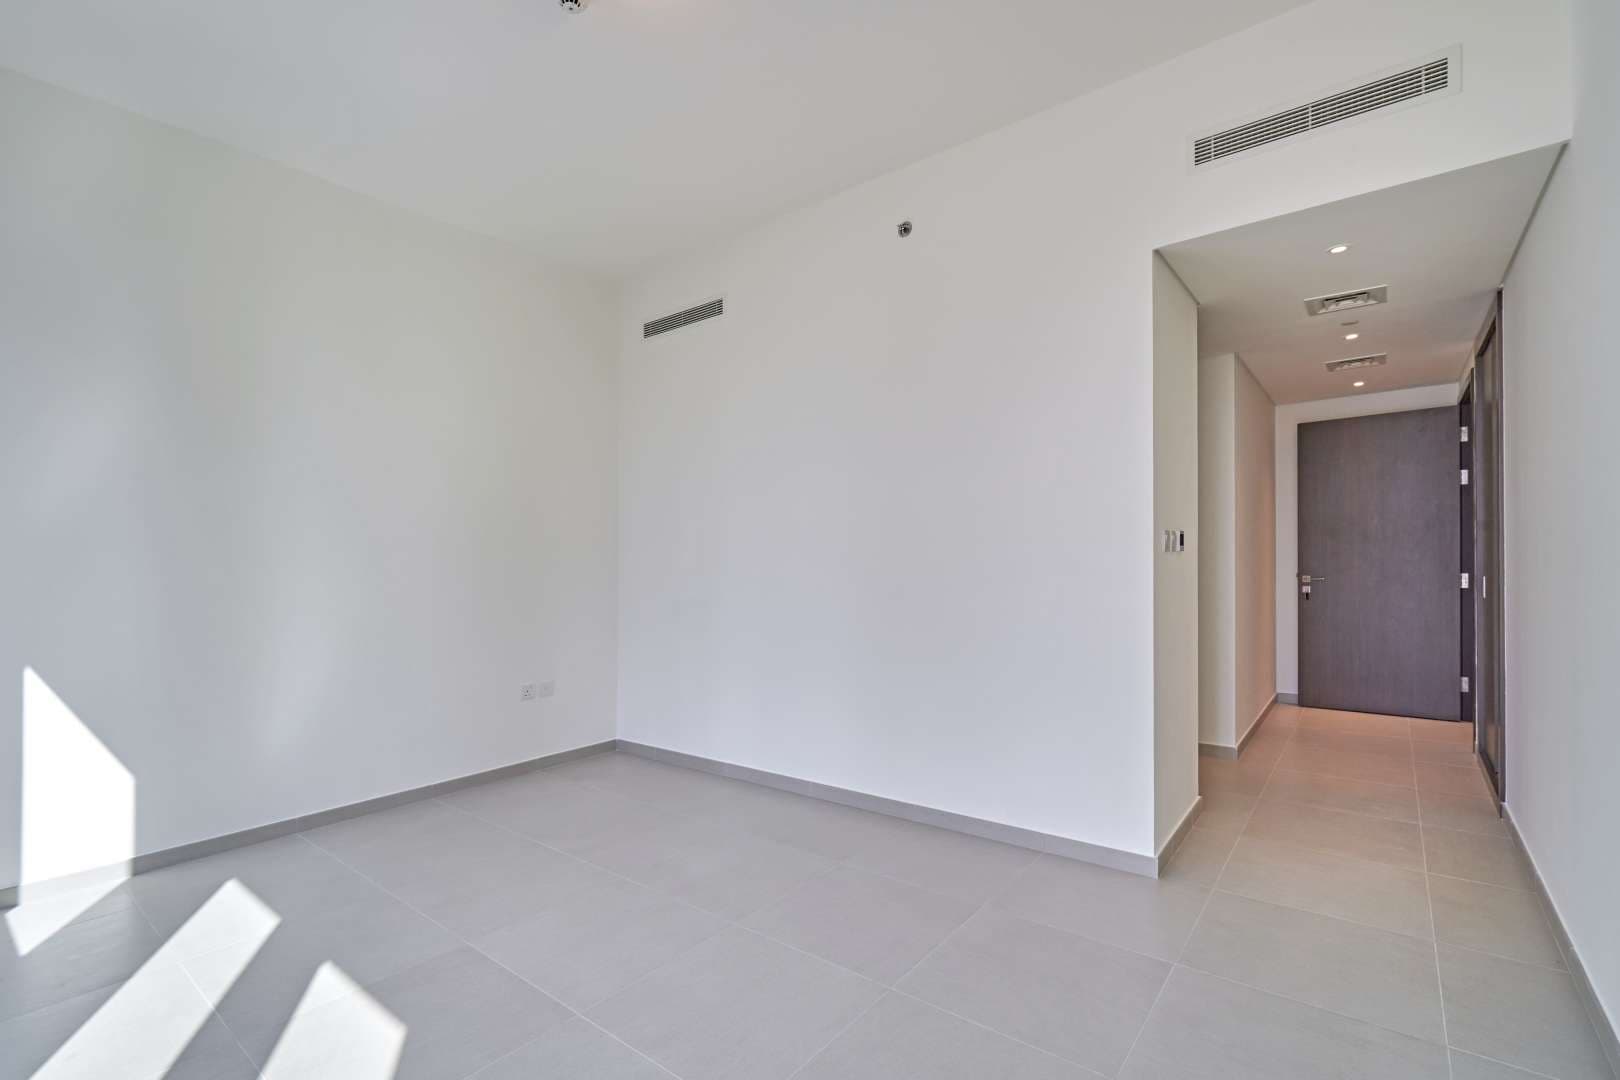 3 Bedroom Apartment For Rent Blvd Heights Lp08935 2fdc9ac8ab3c7600.jpg